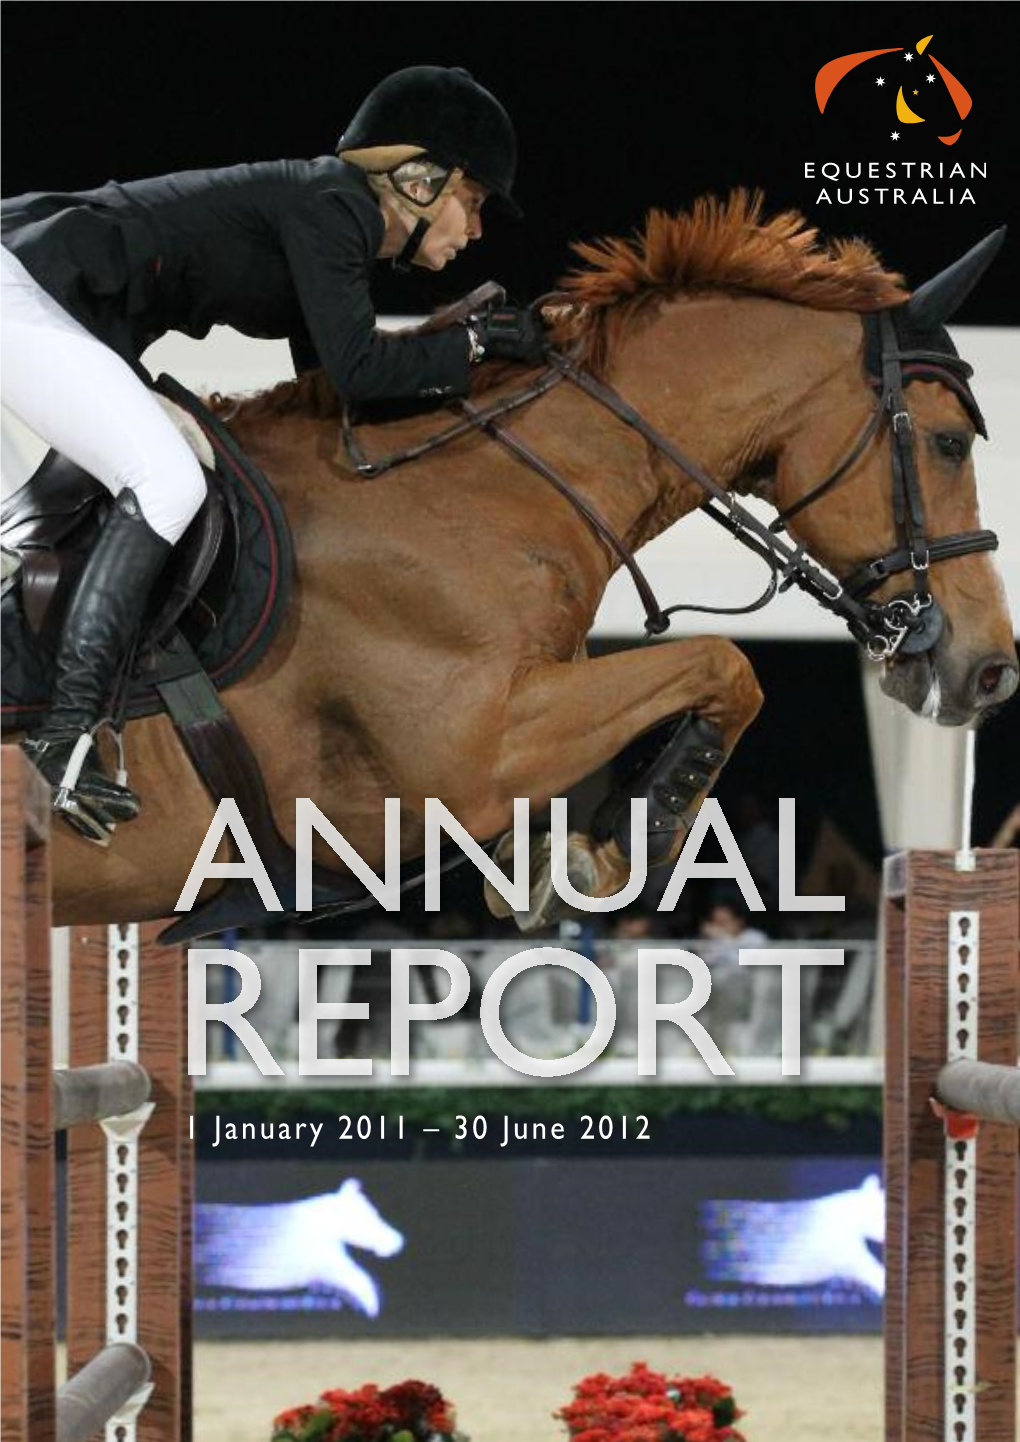 1 January 2011 – 30 June 2012 EQUESTRIAN AUSTRALIA Wishes to Acknowledge Its Program Partners and Sponsors